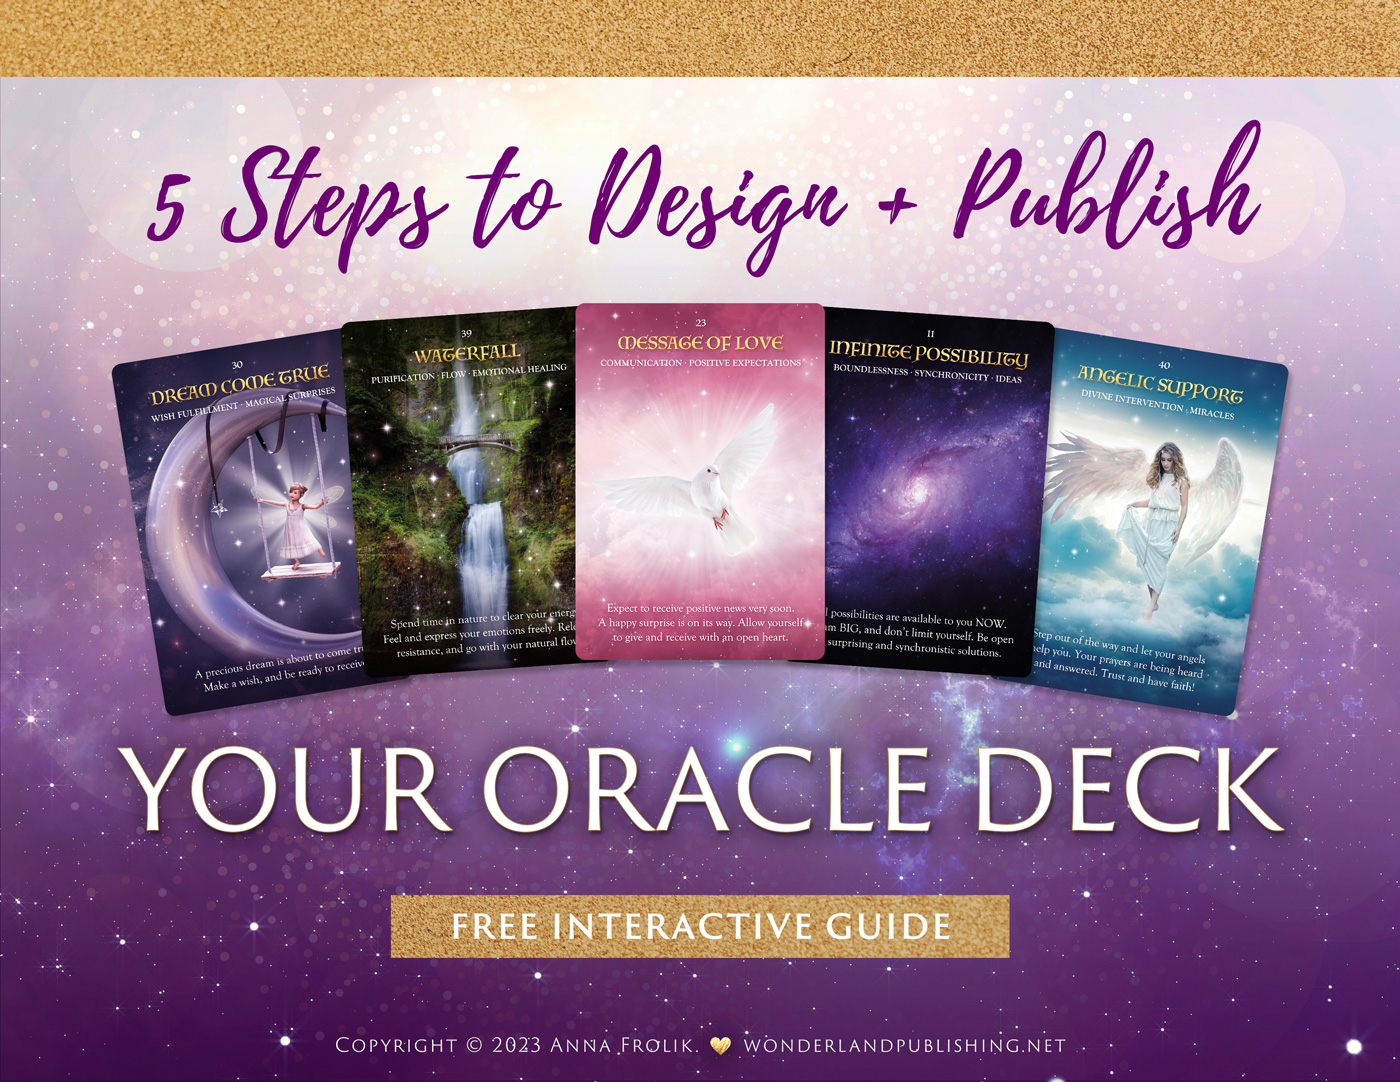 5 Steps to Design + Publish Your Oracle Deck